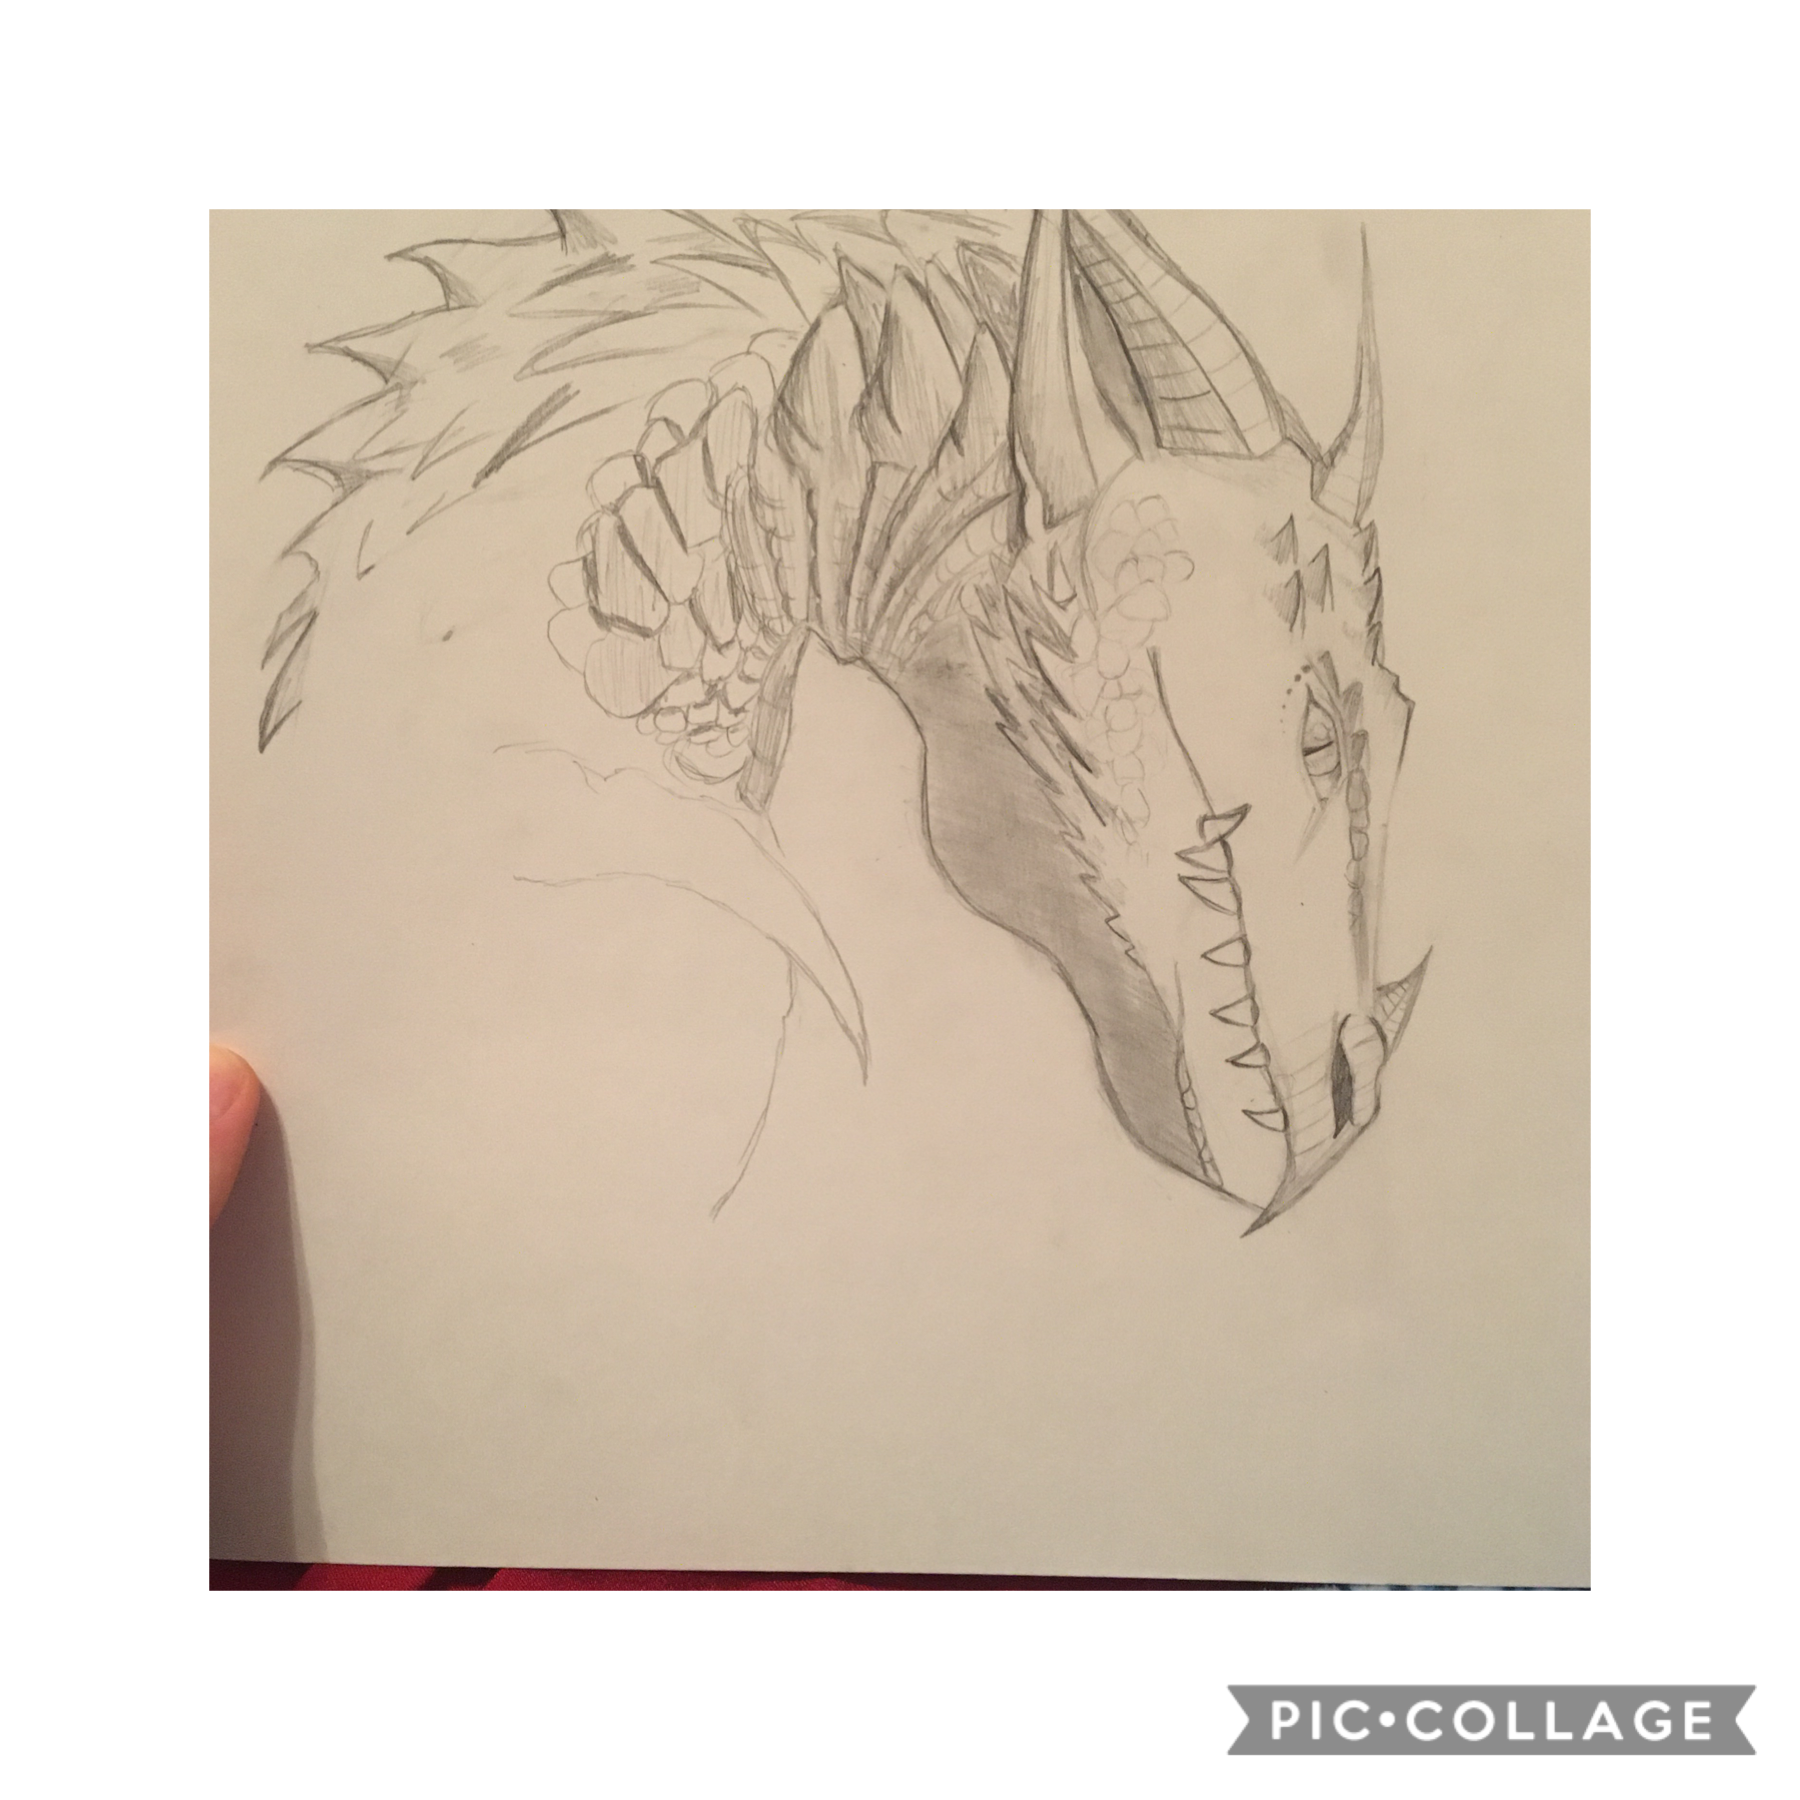 I’m back, it wasn’t very long I know but I realized I feel worse without having anyone to talk to. So here I am again. Also, here’s a dragon, his name is Nightwing and I will finish him soon.